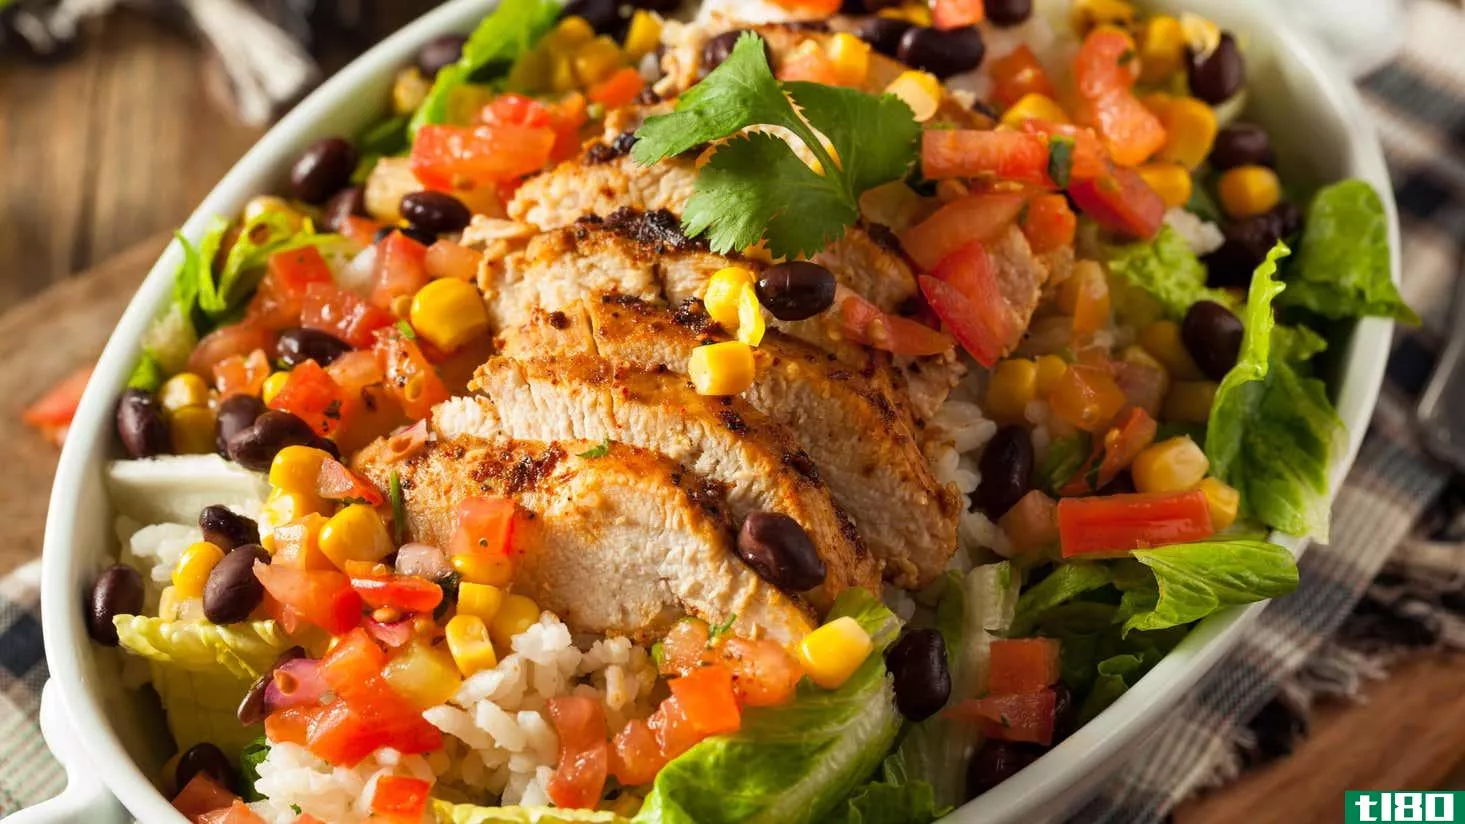 Close-up photo of a Chipotle-style burrito bowl. It has sliced grilled chicken, black beans, corn, rice, lettuce, and tomatoes, with a single cilantro leaf on top for garnish. It's in a white oval bowl on a gray and brown plaid napkin, set on a wooden table.